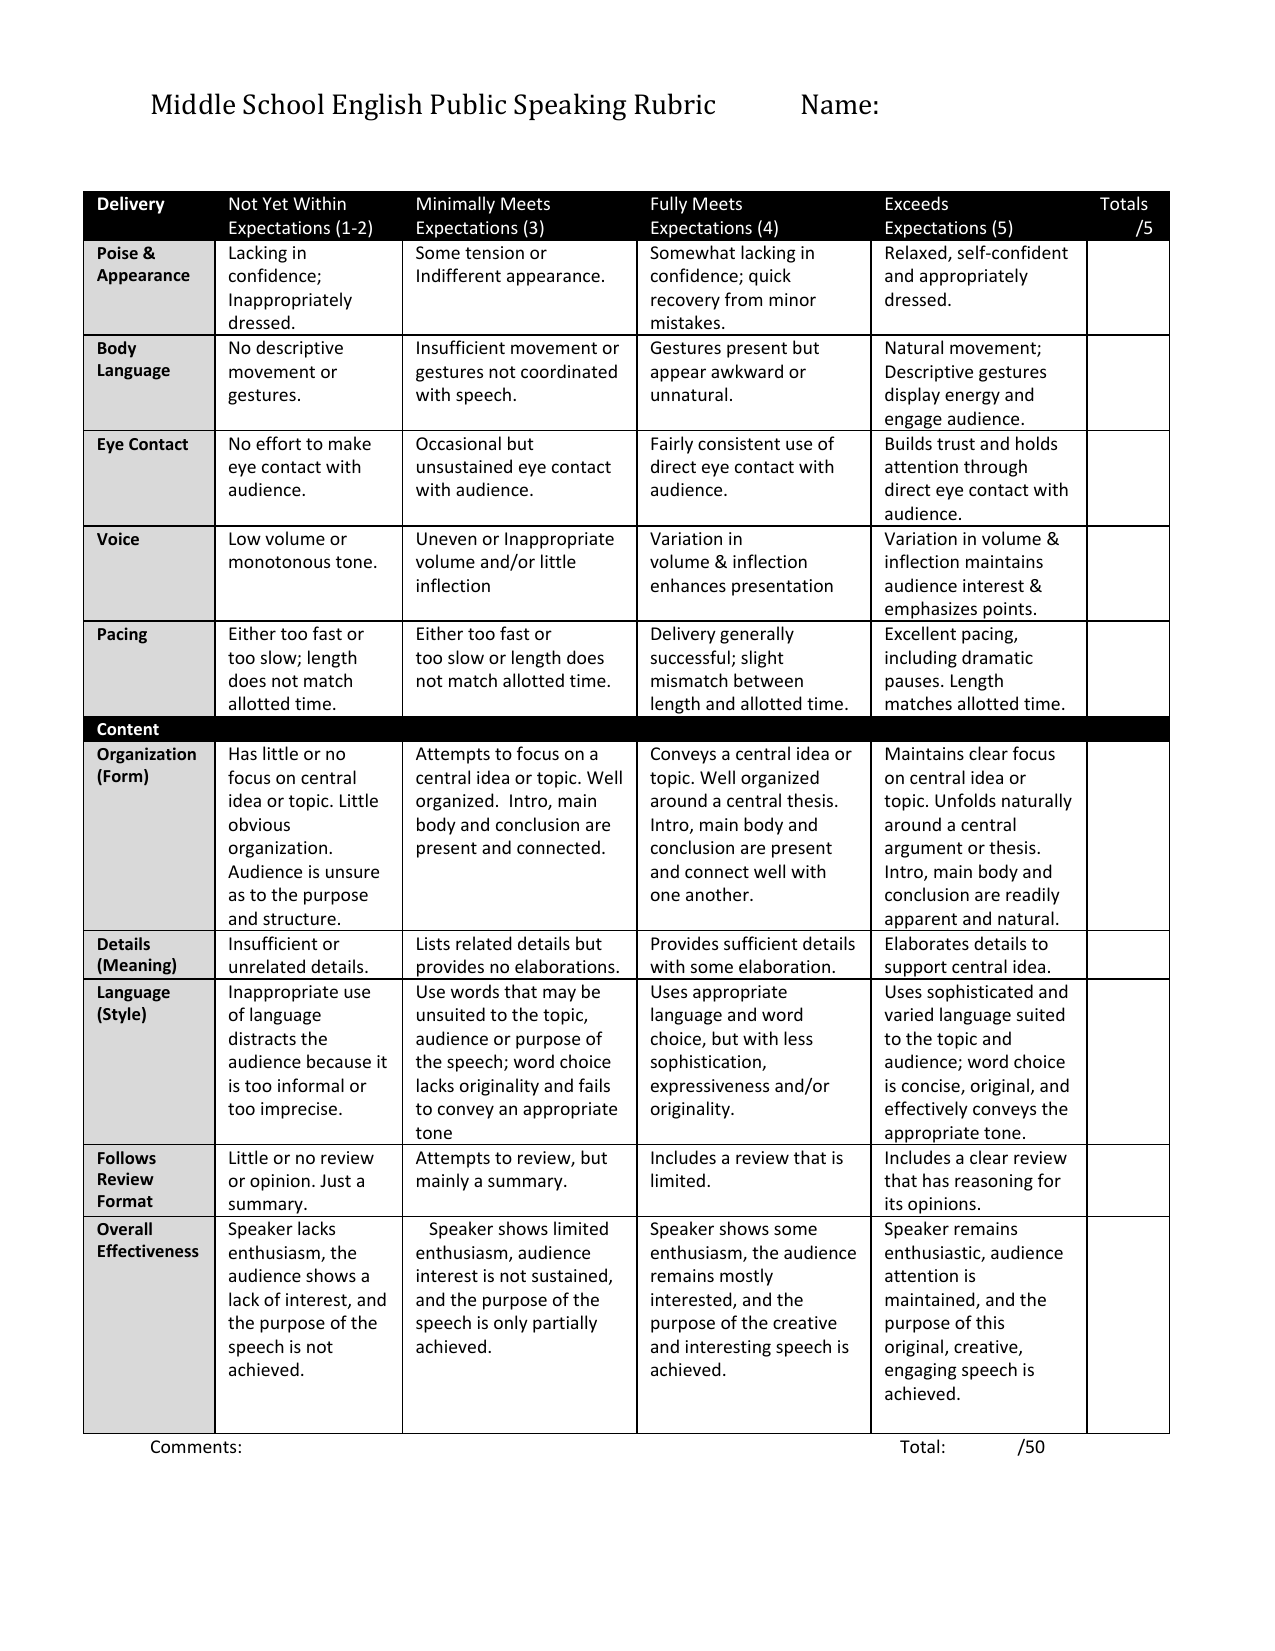 speech delivery rubric